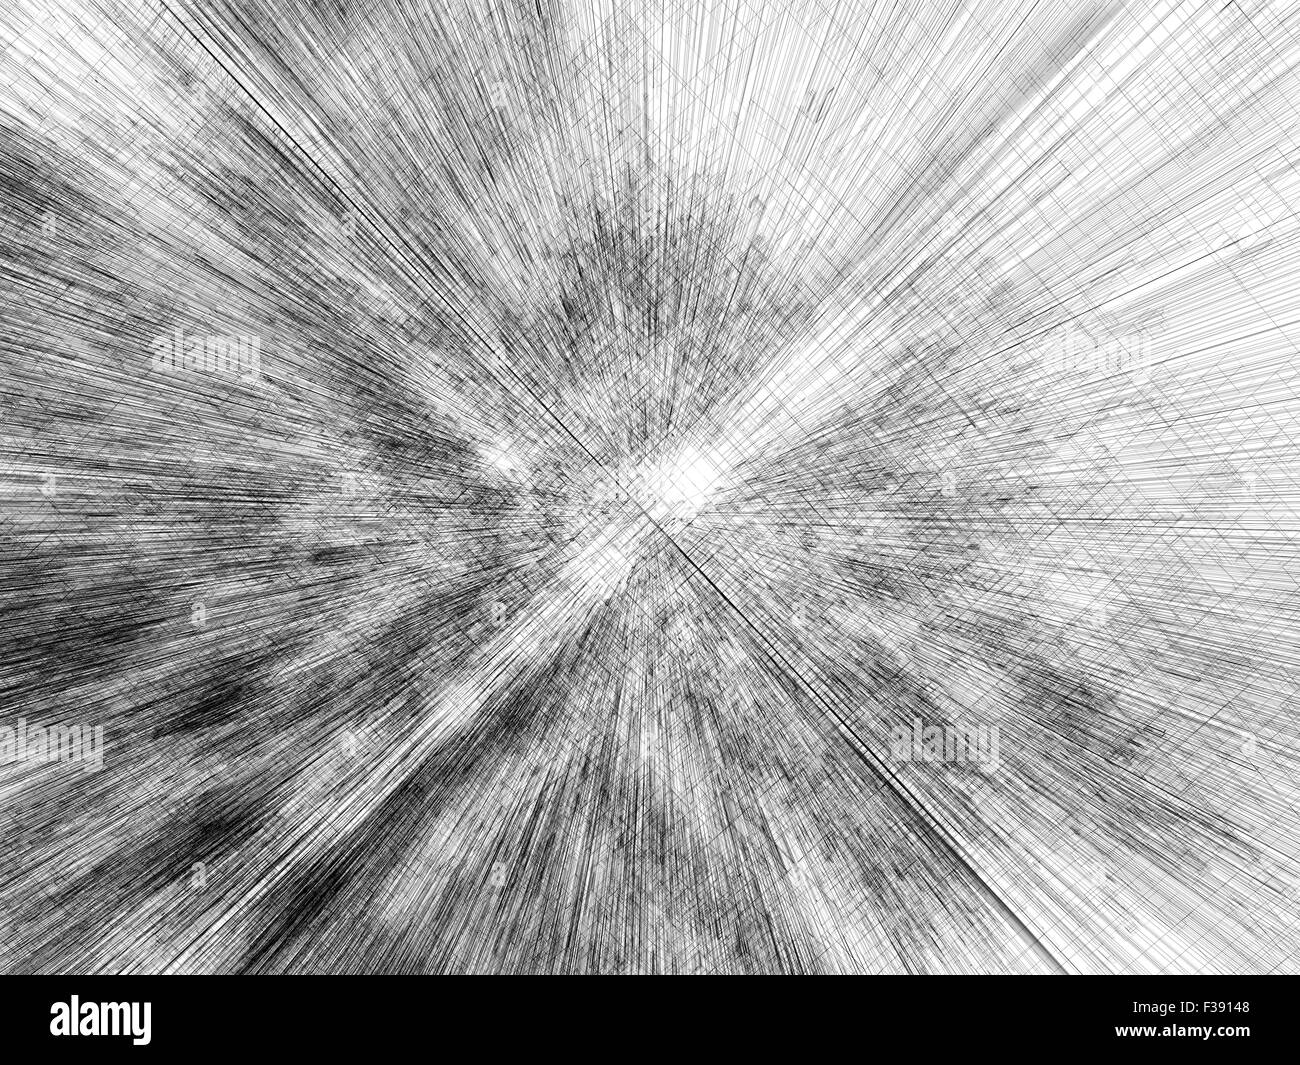 Abstract chaotic futuristic structure perspective, digital 3d illustration, black wire-frame lines over white background Stock Photo